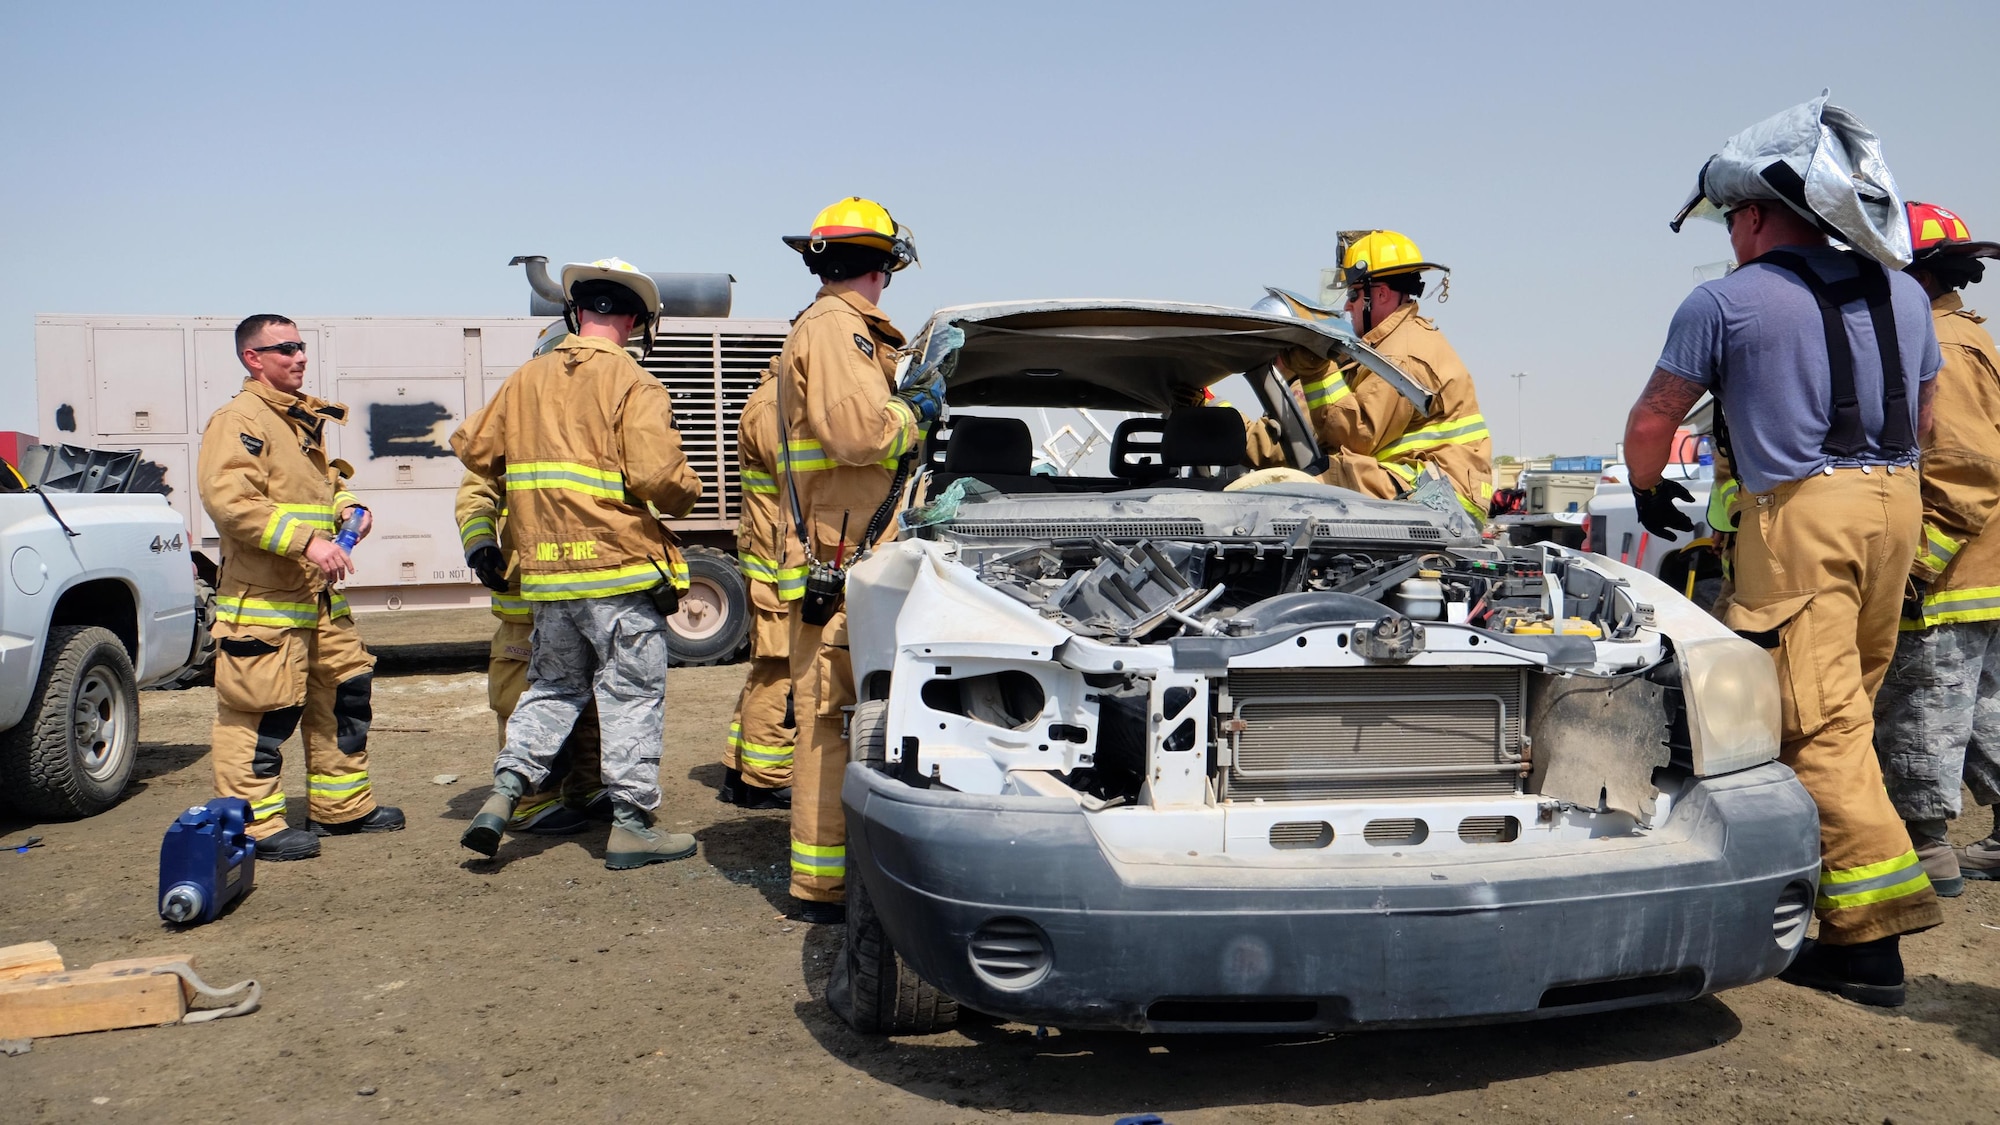 Airmen with the 380th Expeditionary Civil Engineer Squadron Fire Department remove a vehicle's canopy June 23, 2017, at an undisclosed location in southwest Asia. As part of vehicle extrication training, all six supports were cut to remove the canopy and access the passenger compartment. (U.S. Air Force photo by Senior Airman Preston Webb)